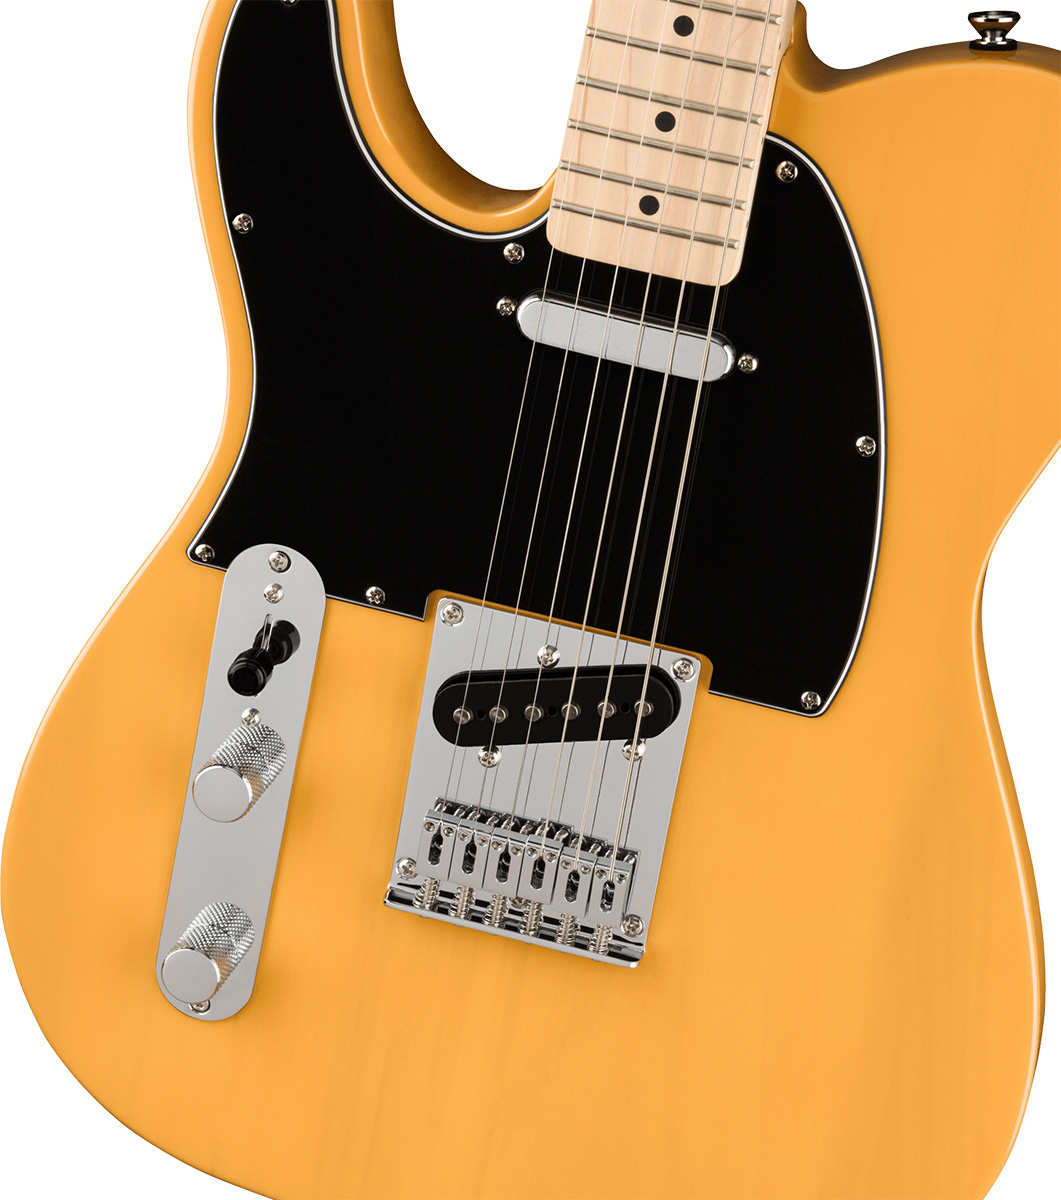 Squier by Fender Affinity Series Telecaster Left-Handed Maple ...